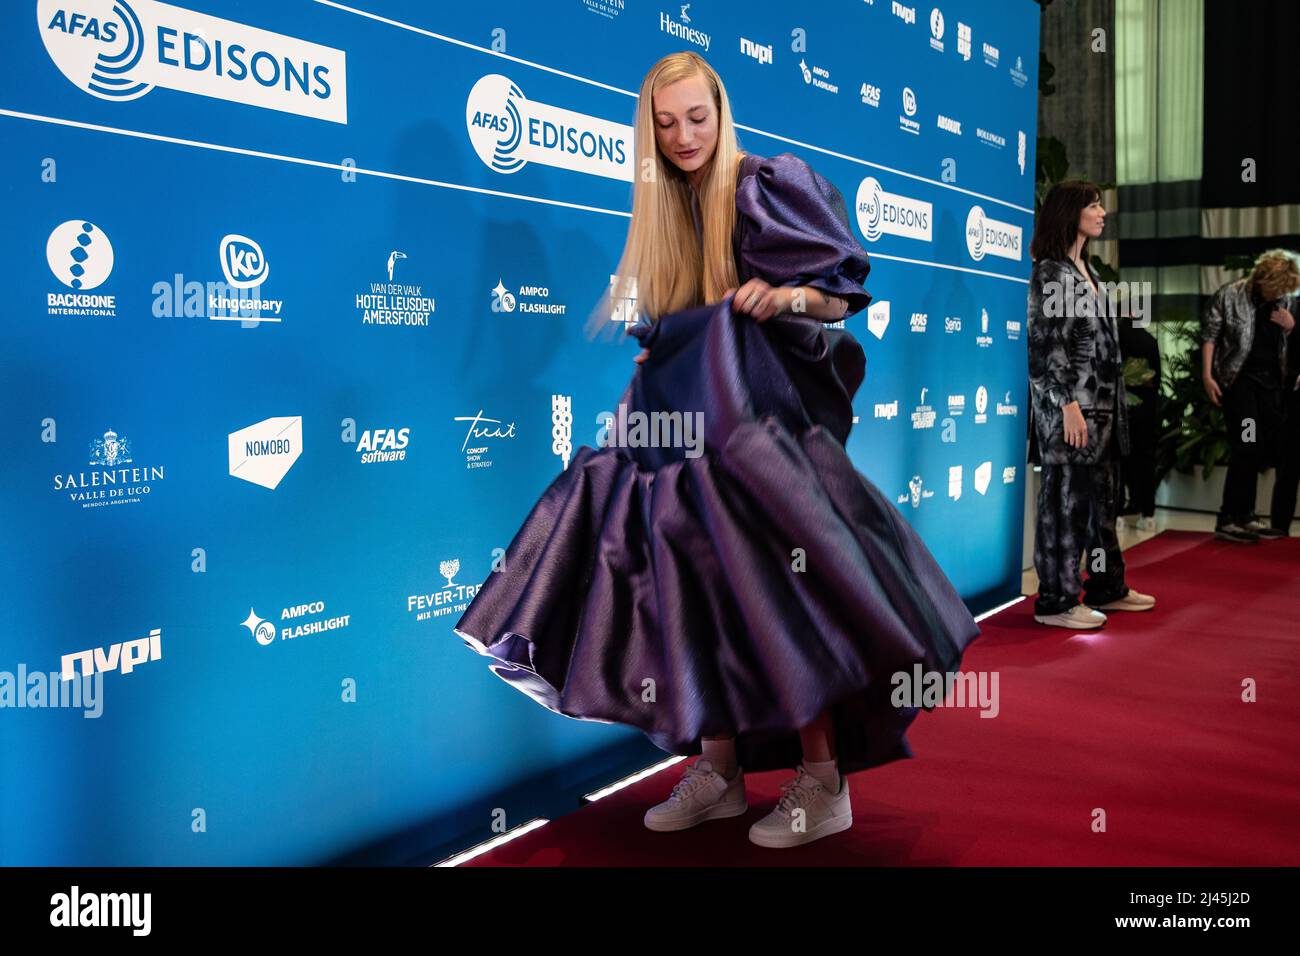 2022-04-11 16:36:39 LEUSDEN - Singer S10 (Stien den Hollander) on the red  carpet prior to the presentation of the Edison Pop prizes 2022, where she  wore an outfit by designer duo Viktor